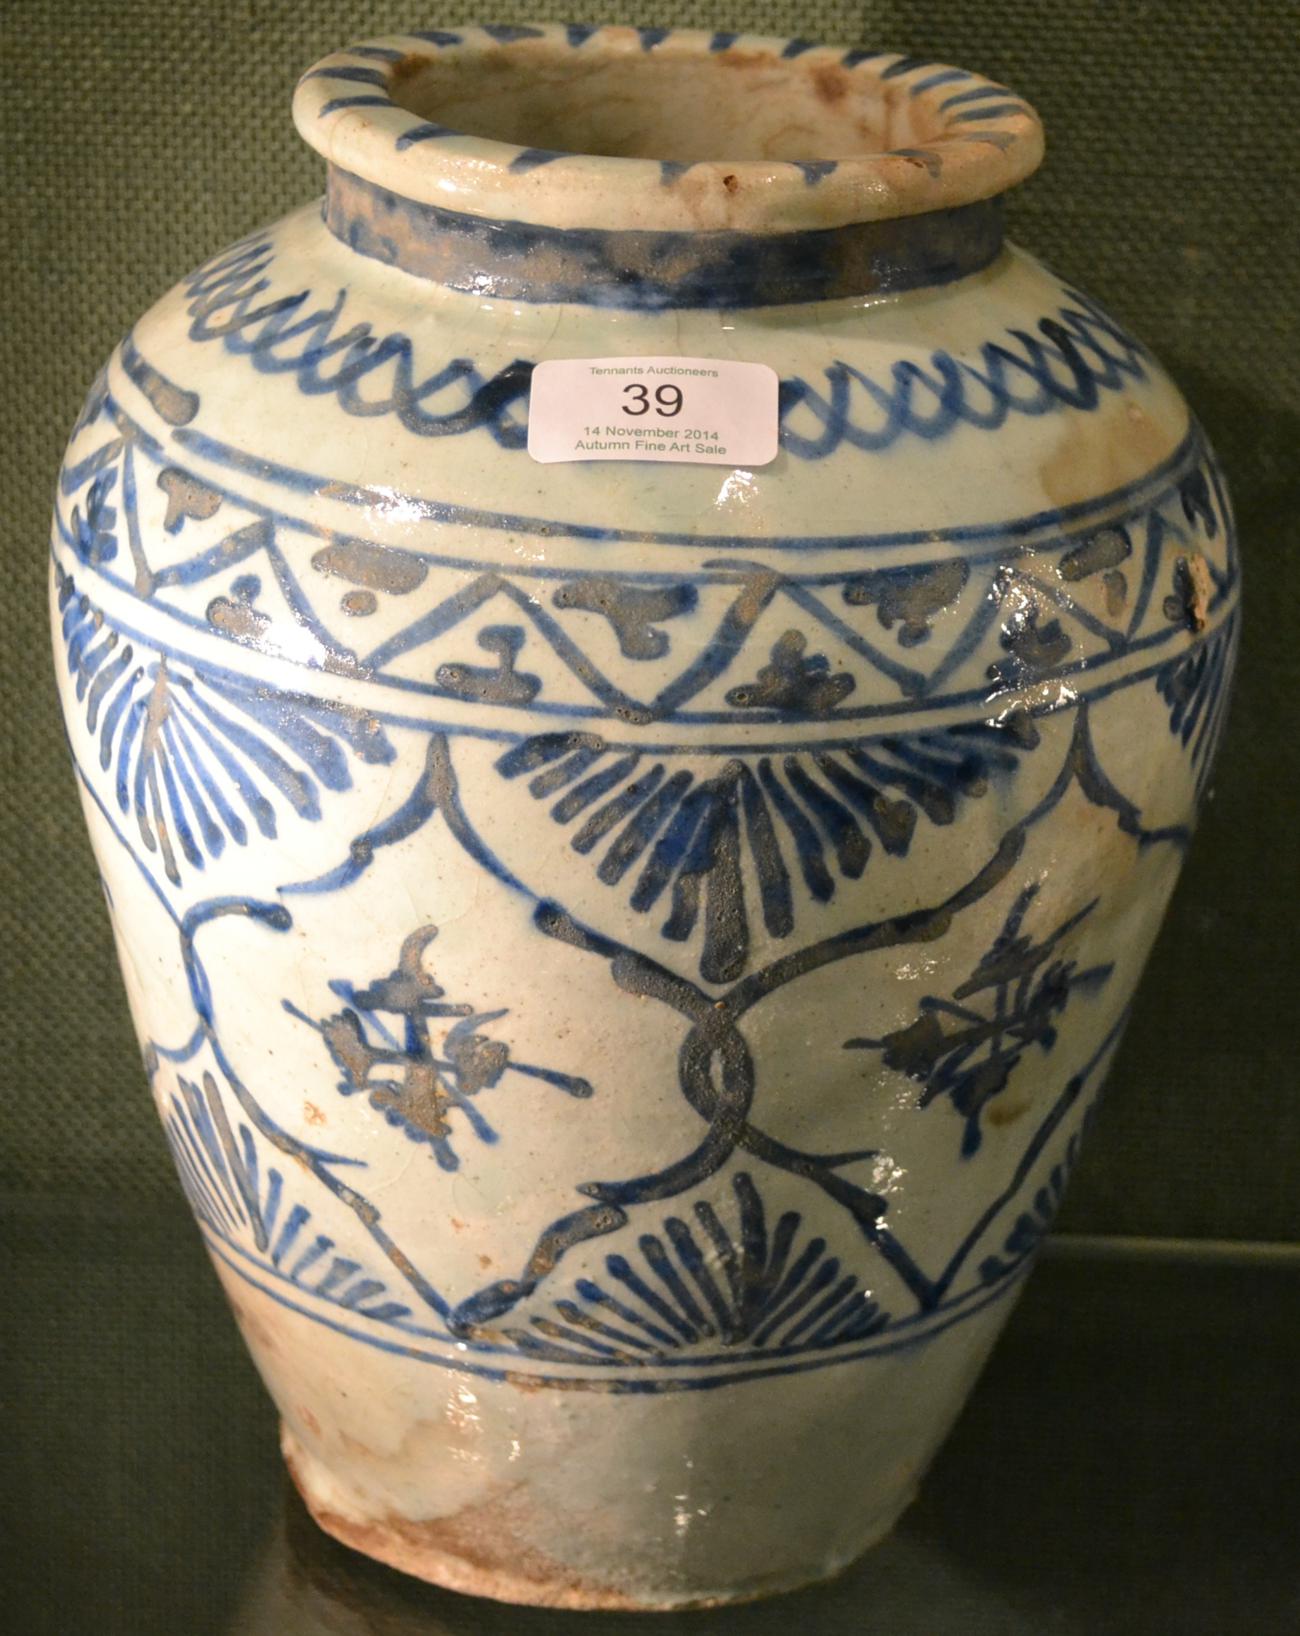 A Persian Faience Jar, probably 17th century, of baluster form with flared neck, painted in blue